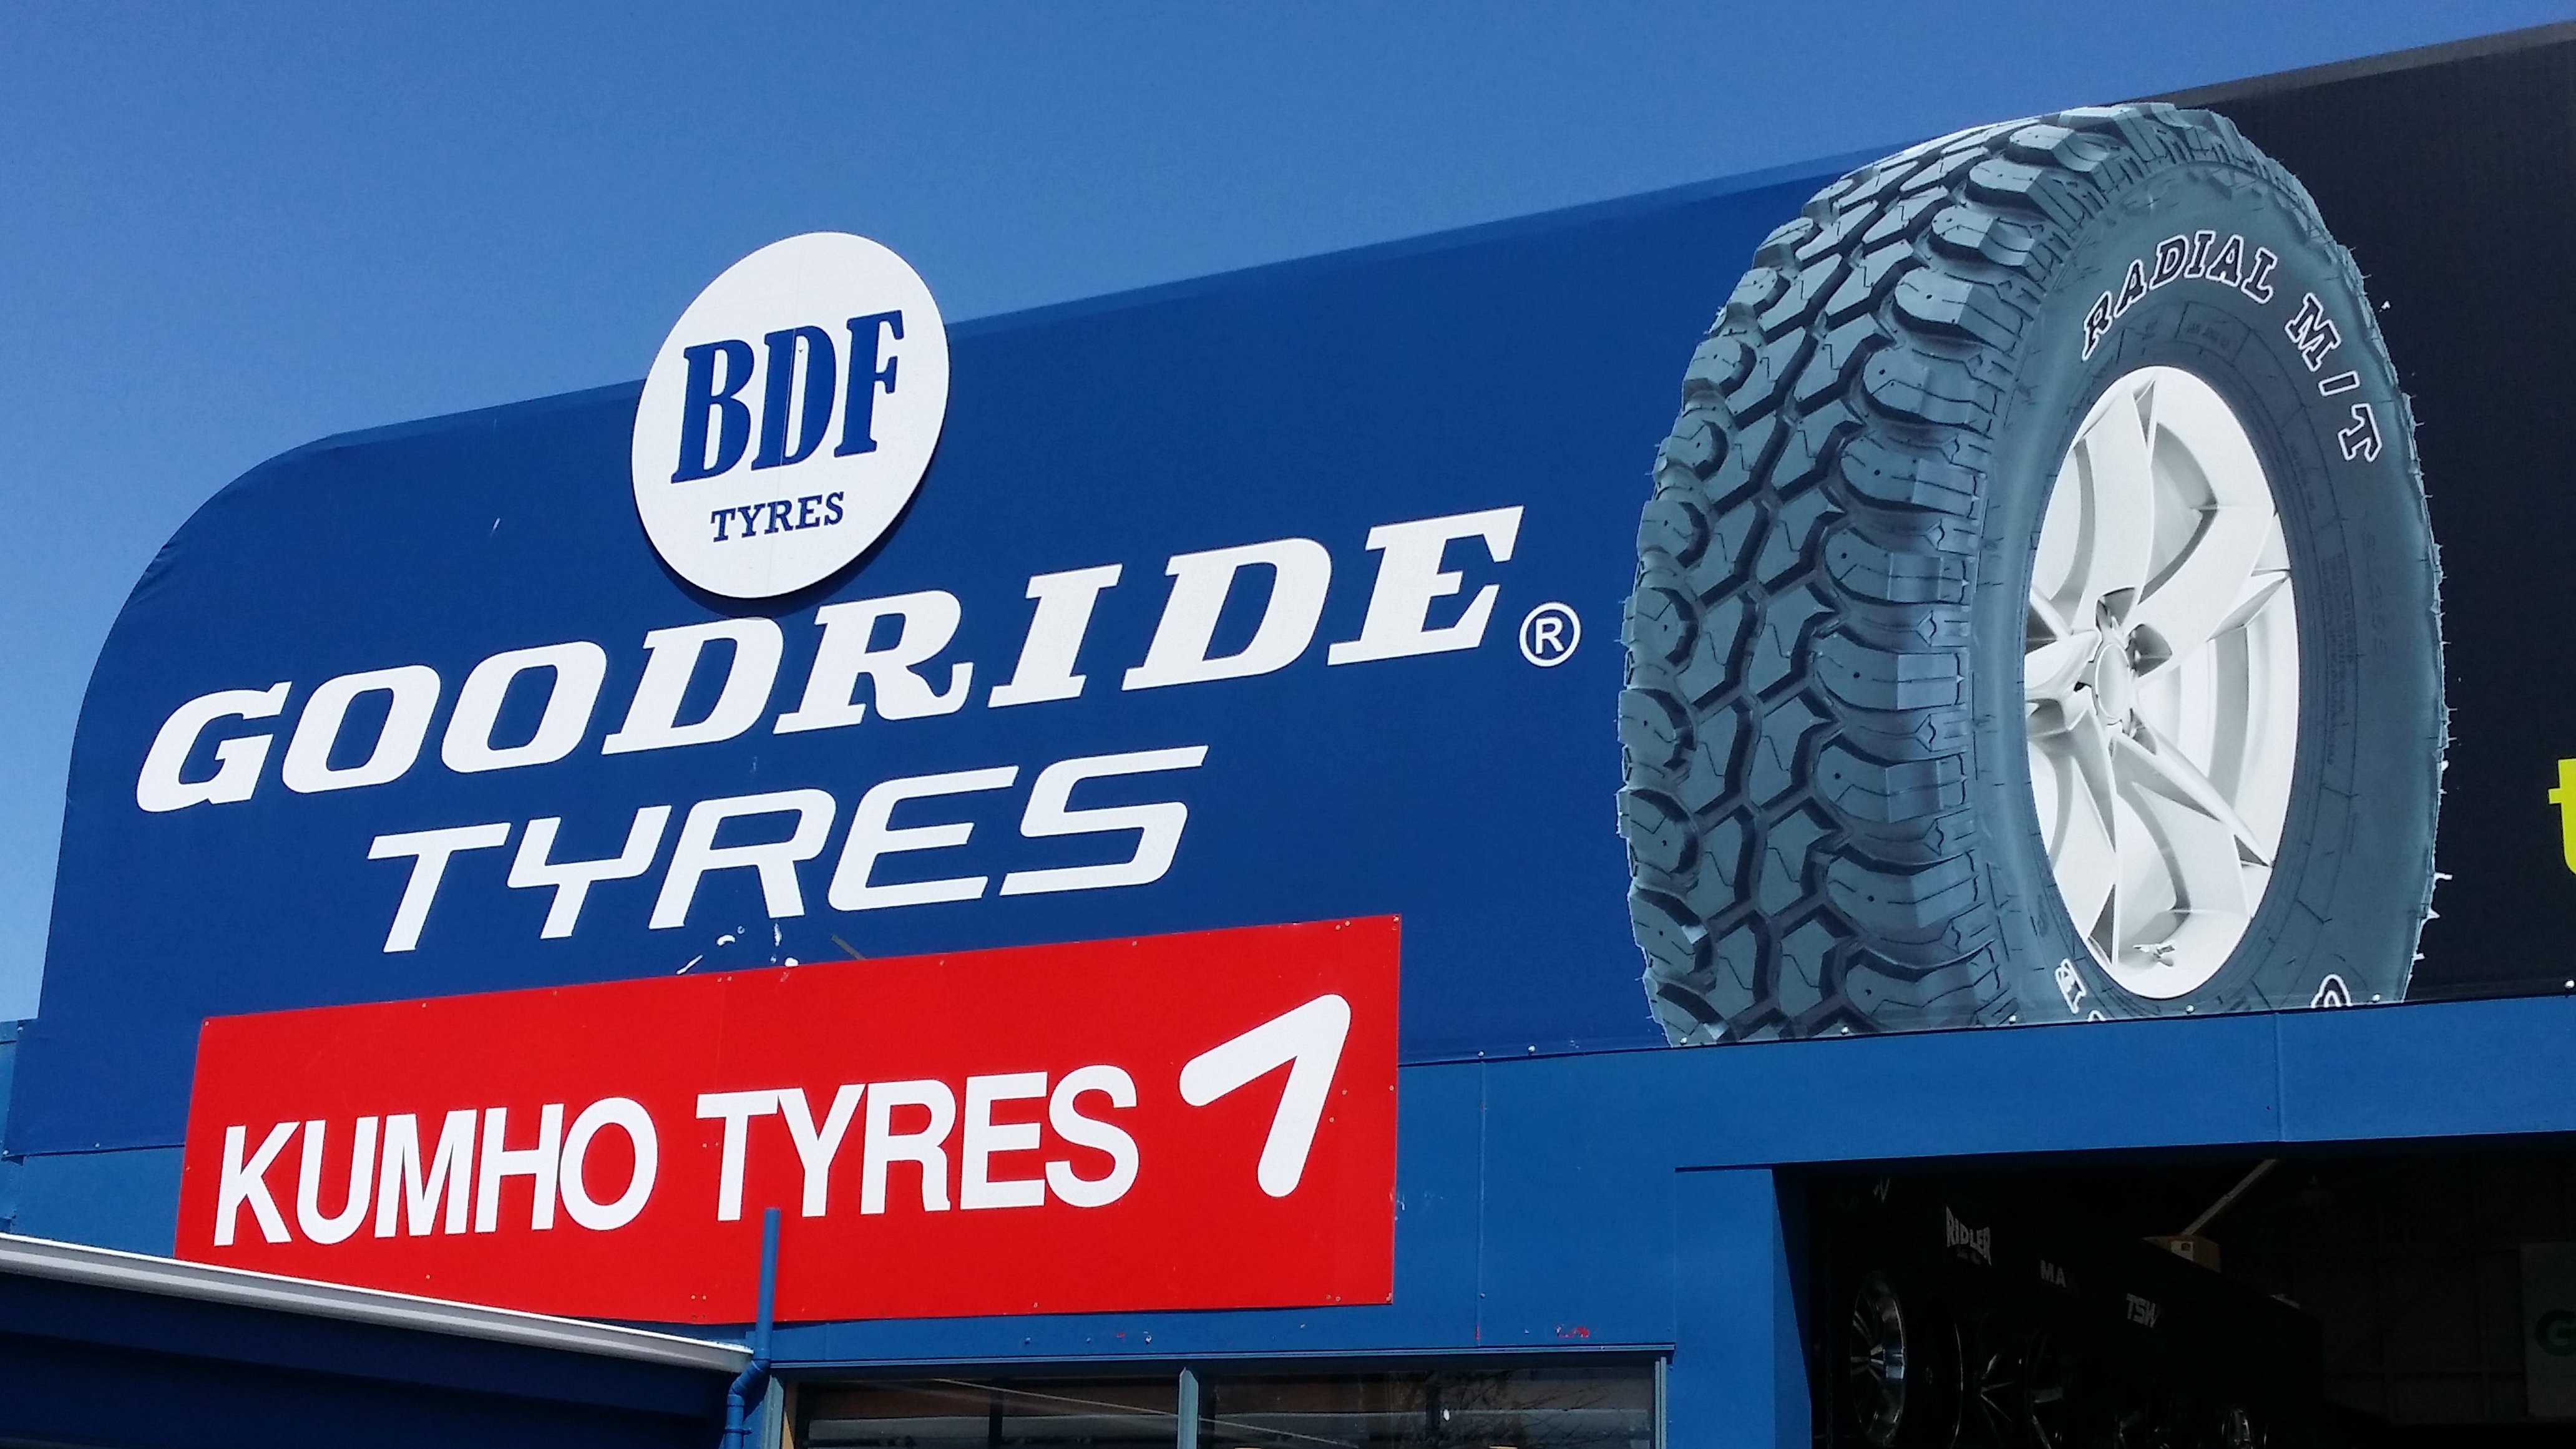 BDF Tyres, Goodride Tyres and Humho Tyres signs on the roof of Takanini tyre centre